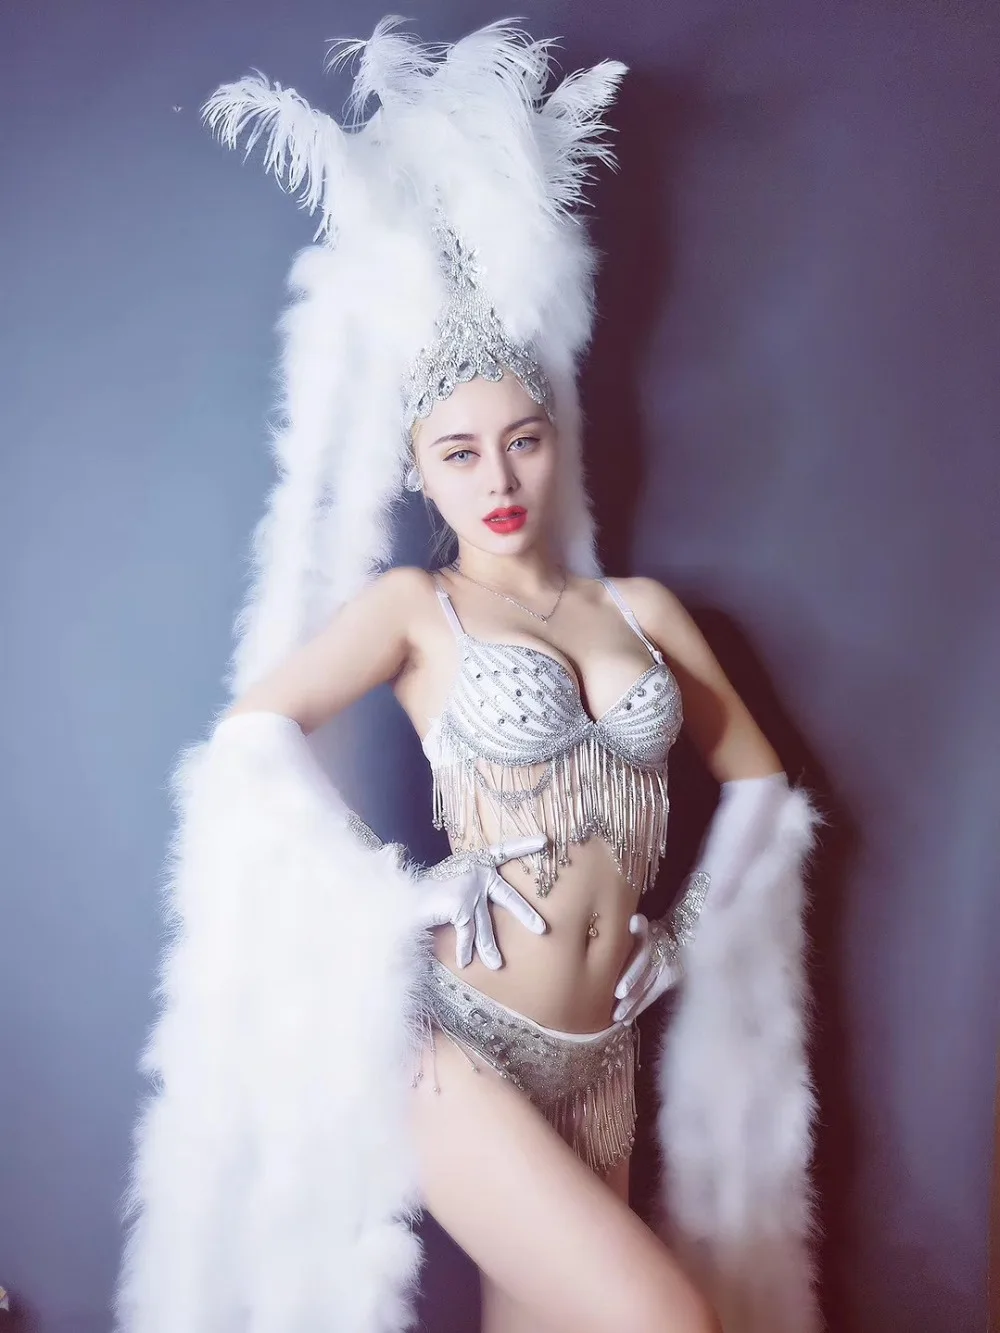 

Crystals Bikini Set Sexy White Feathers Gloves Headdress Sparkly Nightclub Female Party Models Catwalk Stage Outfit DJ Costume